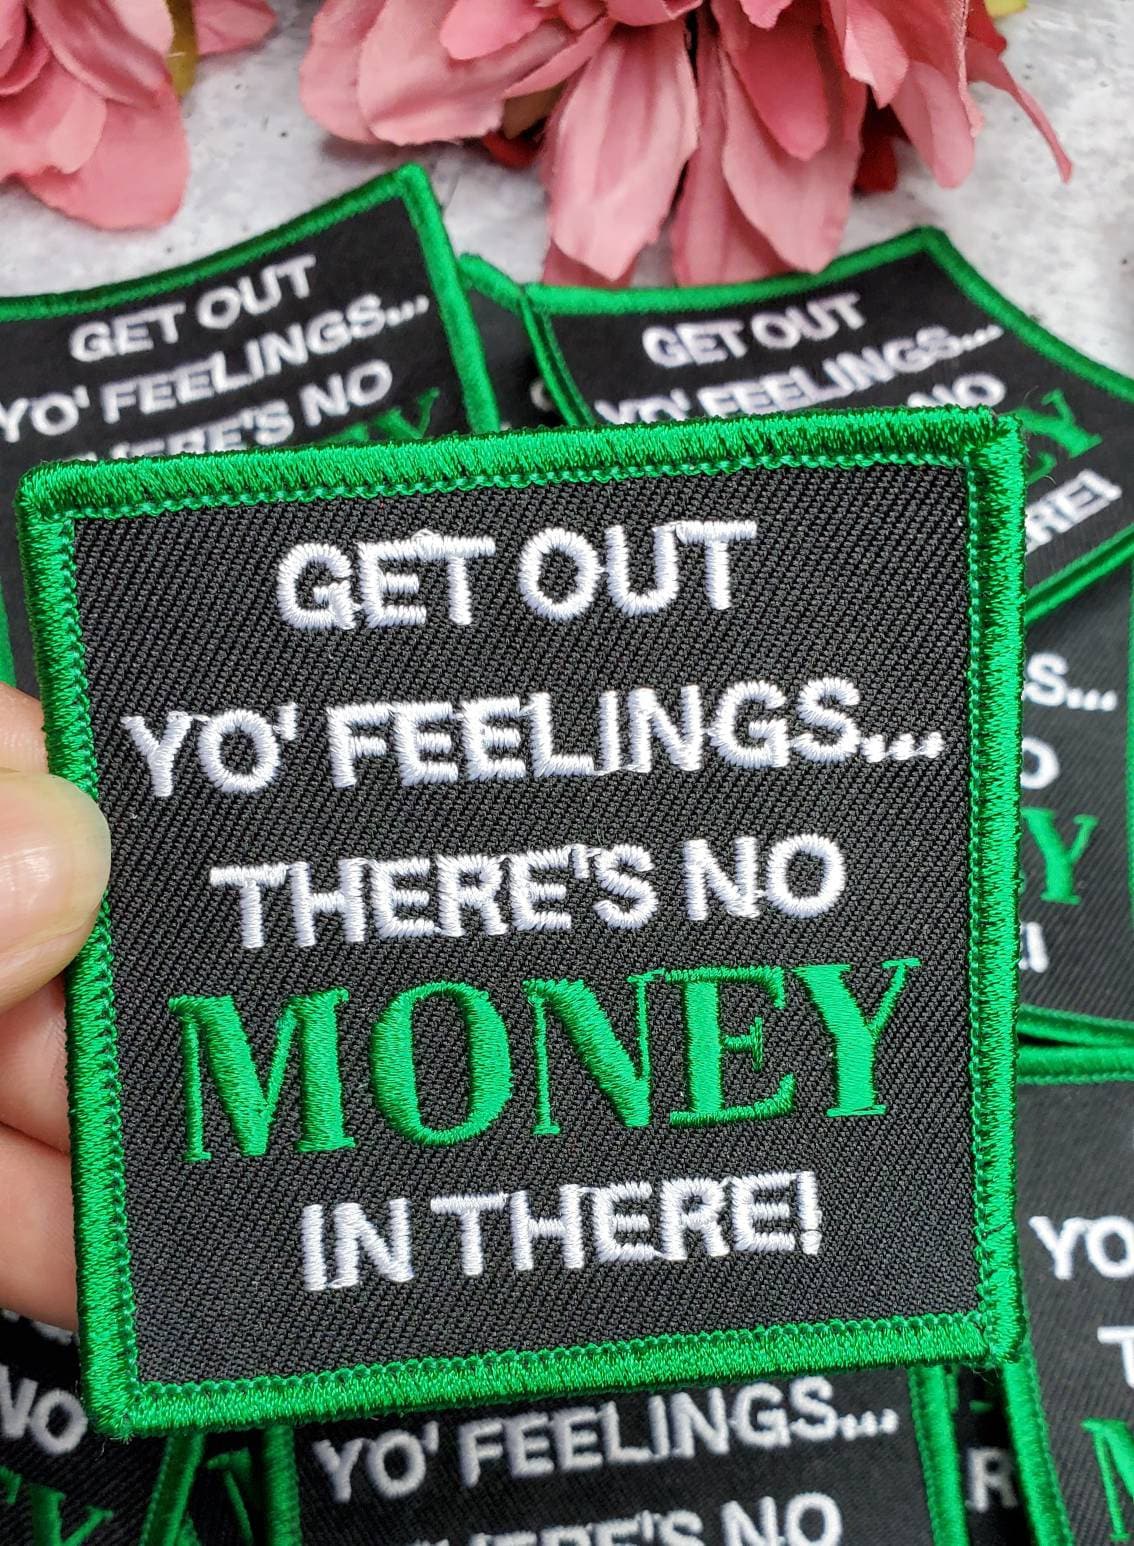 New Arrival, Statement Patch "Get Out Yo Feelings, There's No Money in There" Iron-on Embroidered Patch, Size 3"x3", DIY Applique